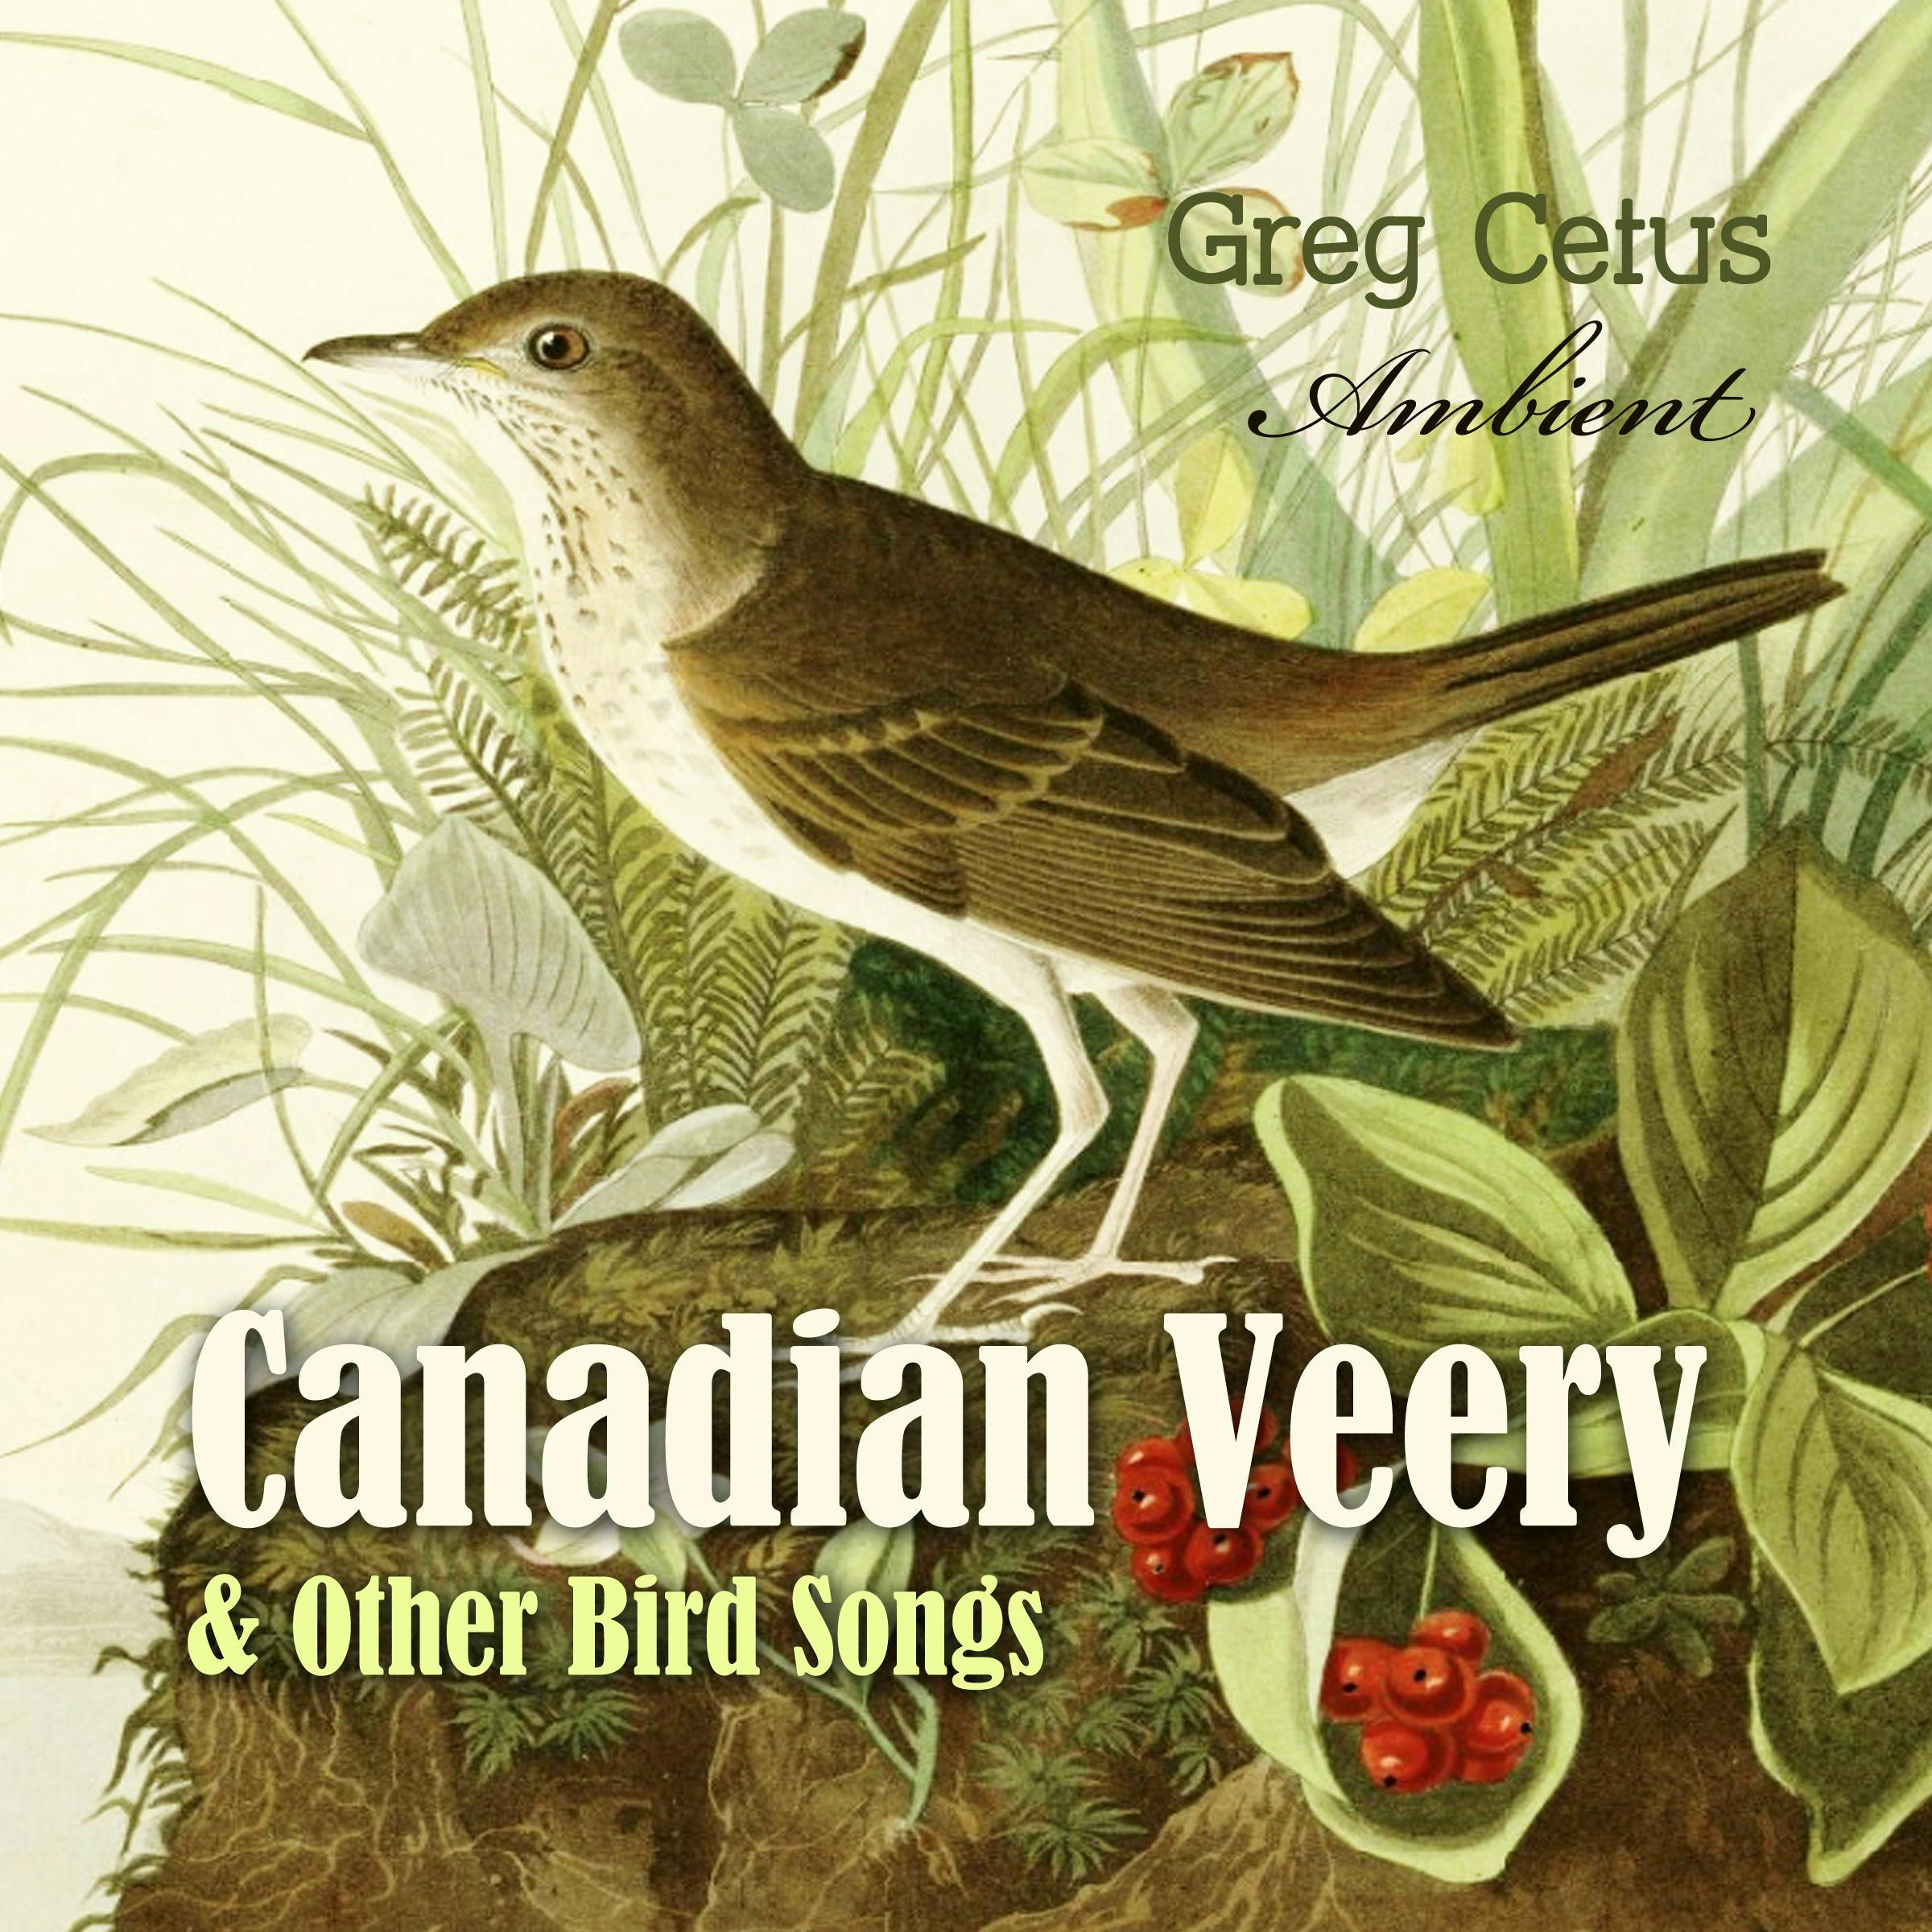 Canadian Veery and Other Bird Songs: Ambient Soundscape for Peace of Mind - Greg Cetus